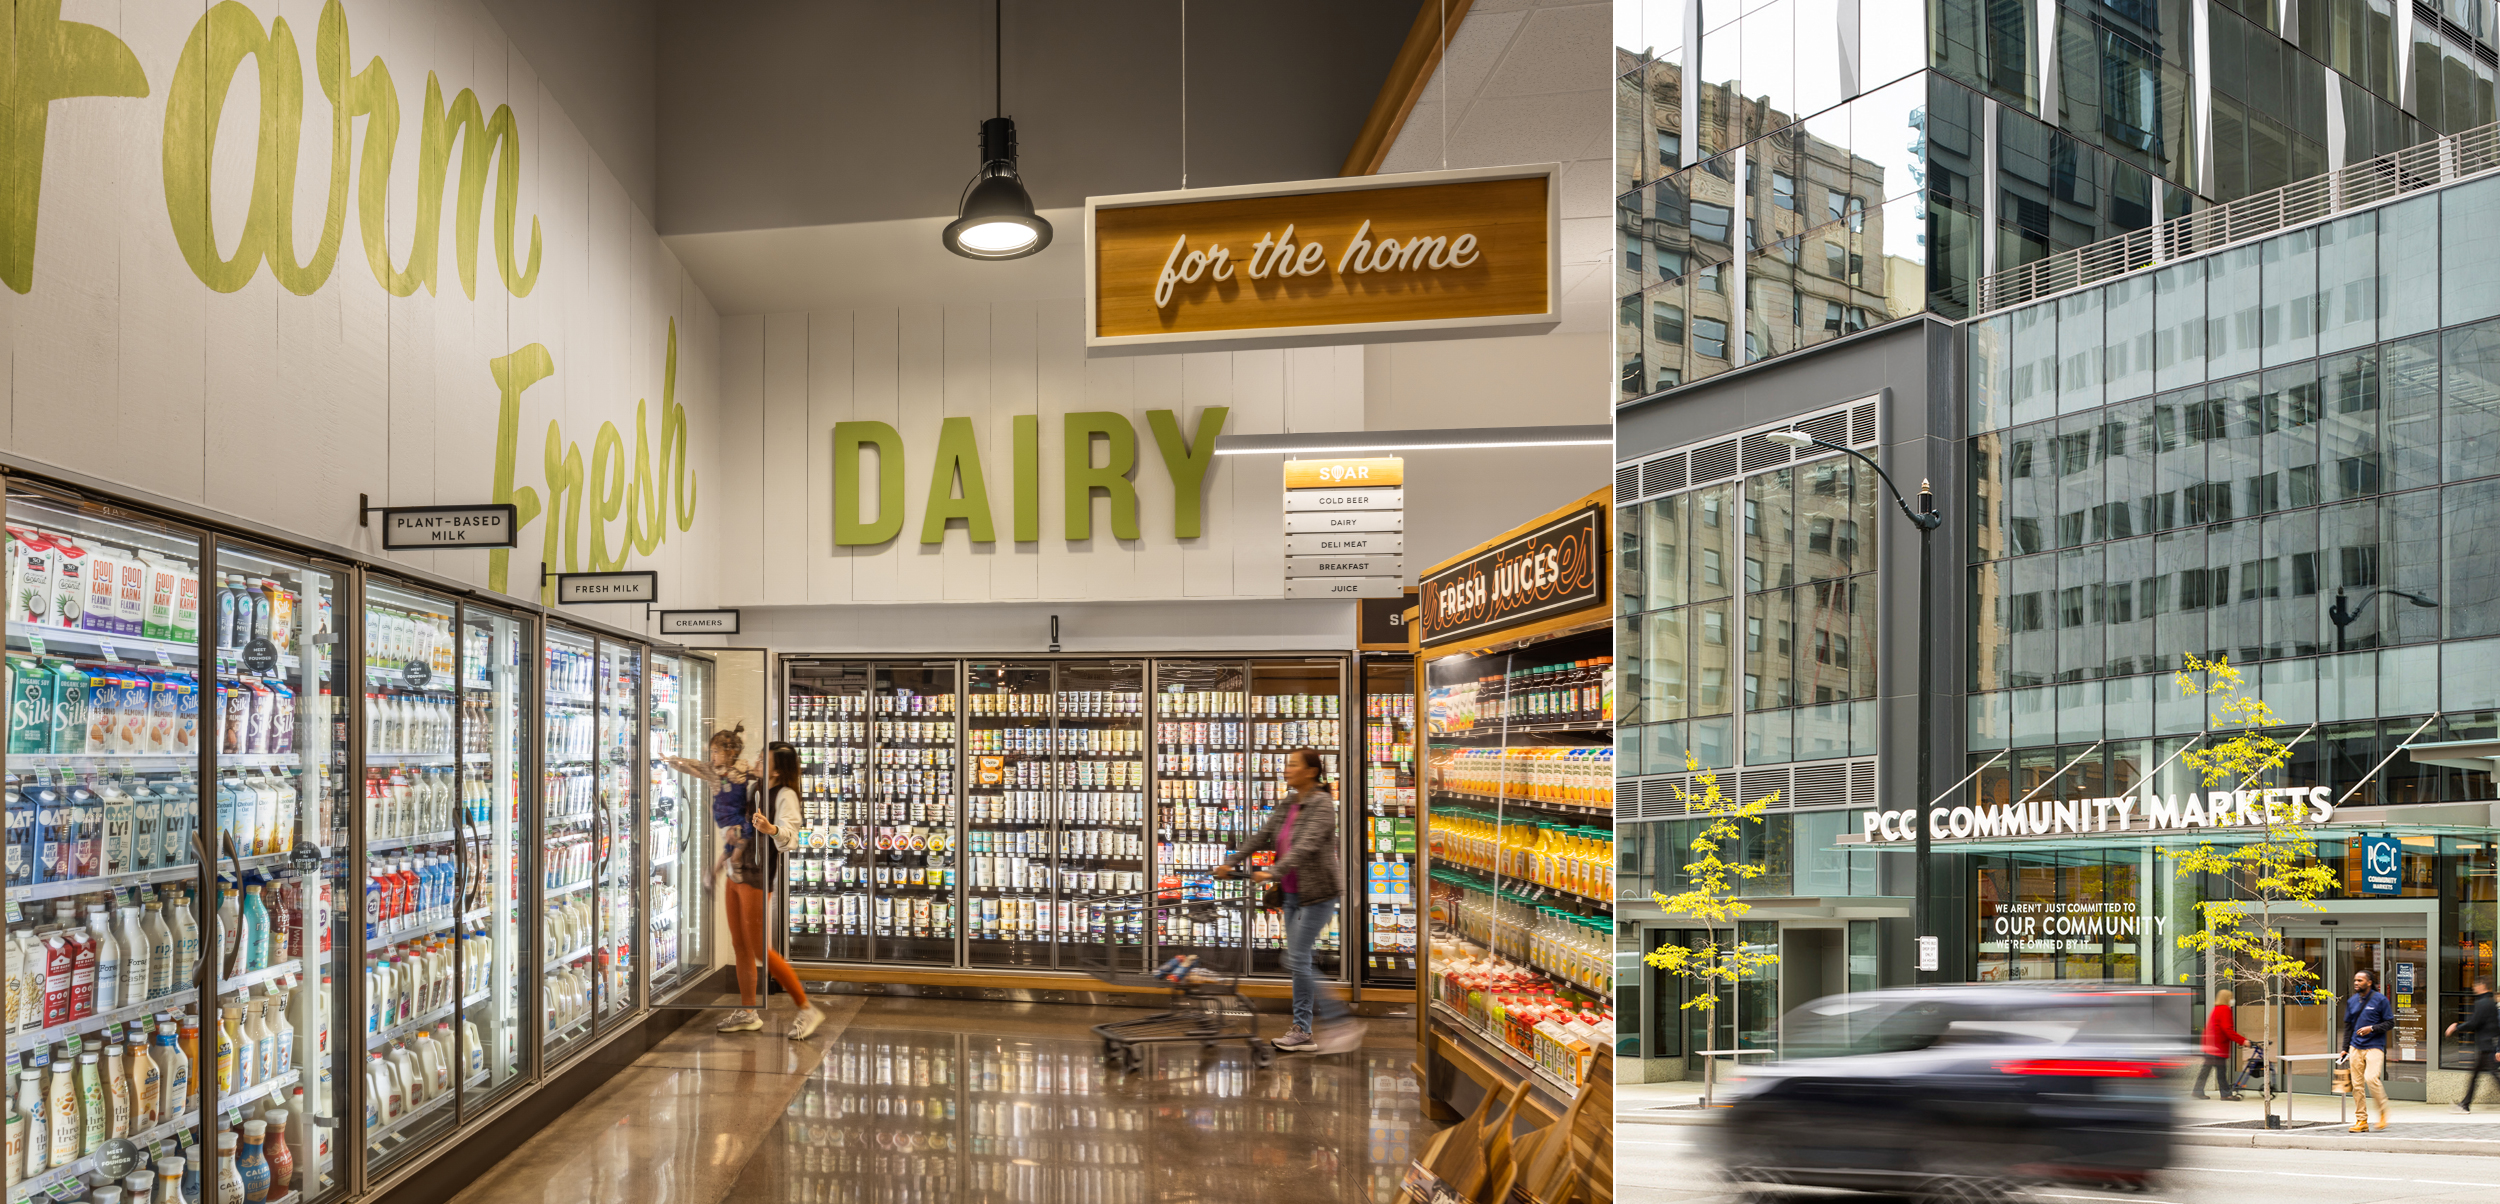 Two West Coast Grocers Are Localizing Their Store Designs to Keep Shoppers Coming Back